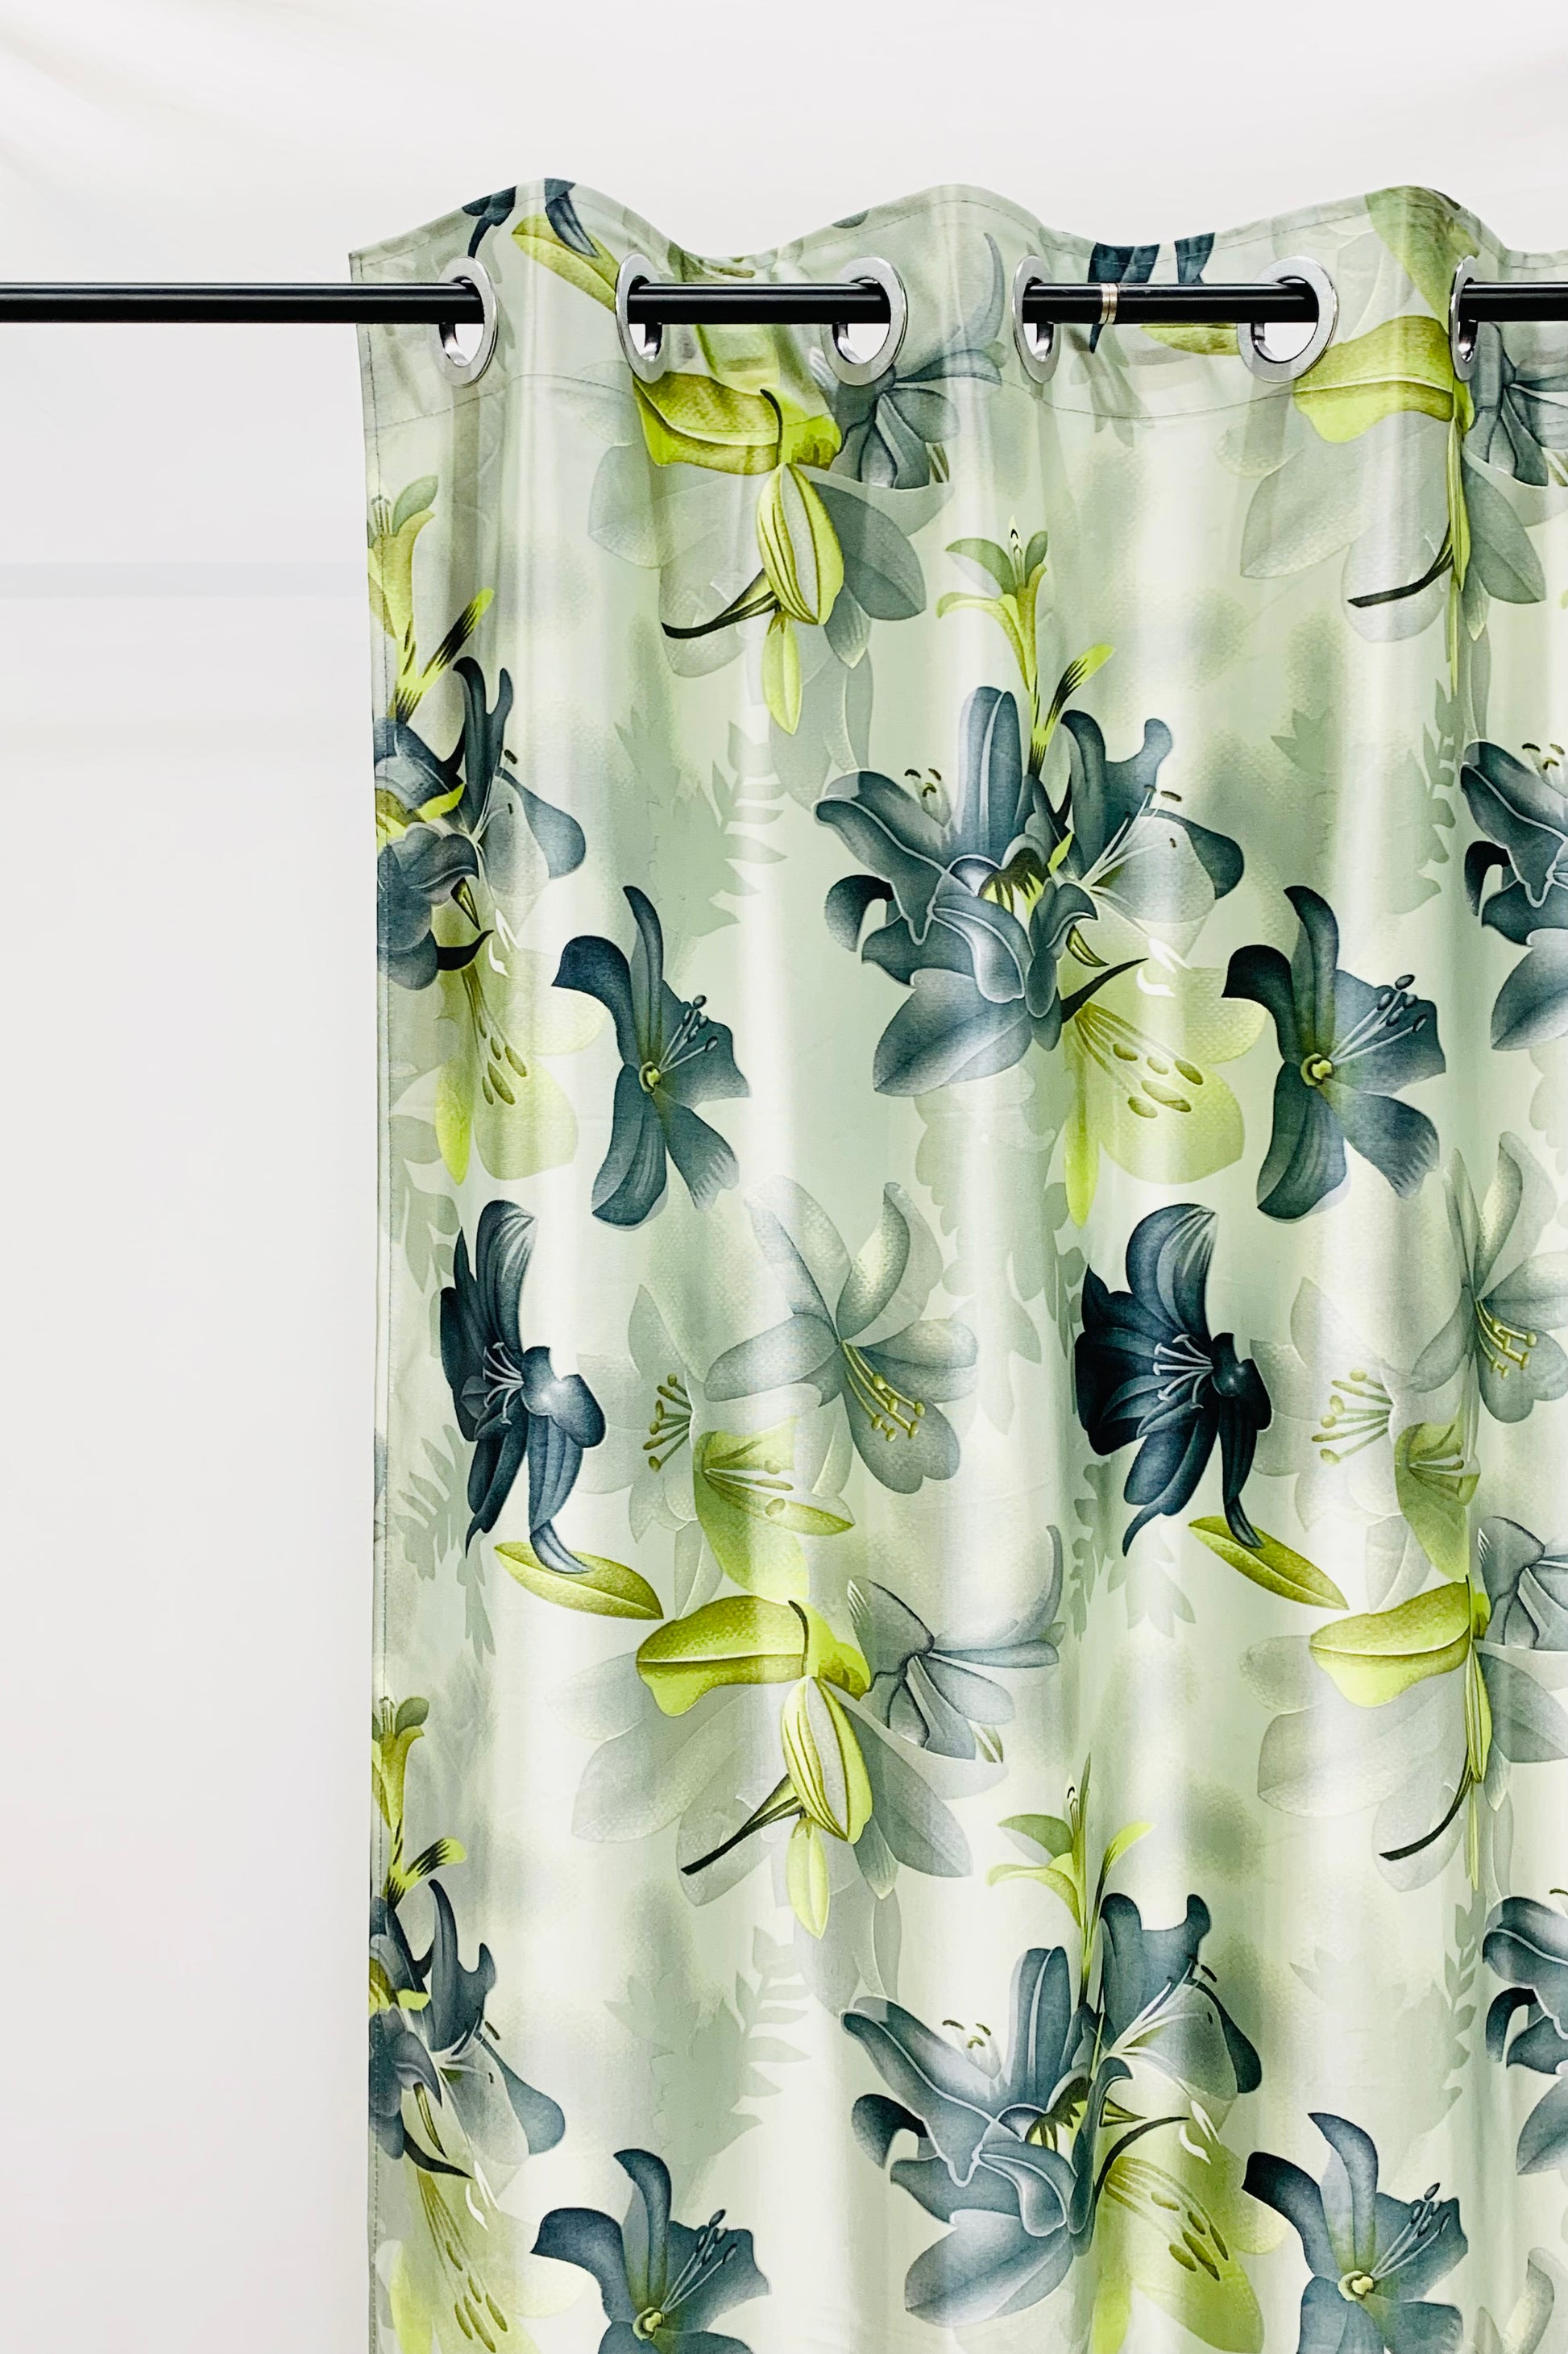 Swiss Orchid Printed Curtain - Grey - PARDEWALE.in